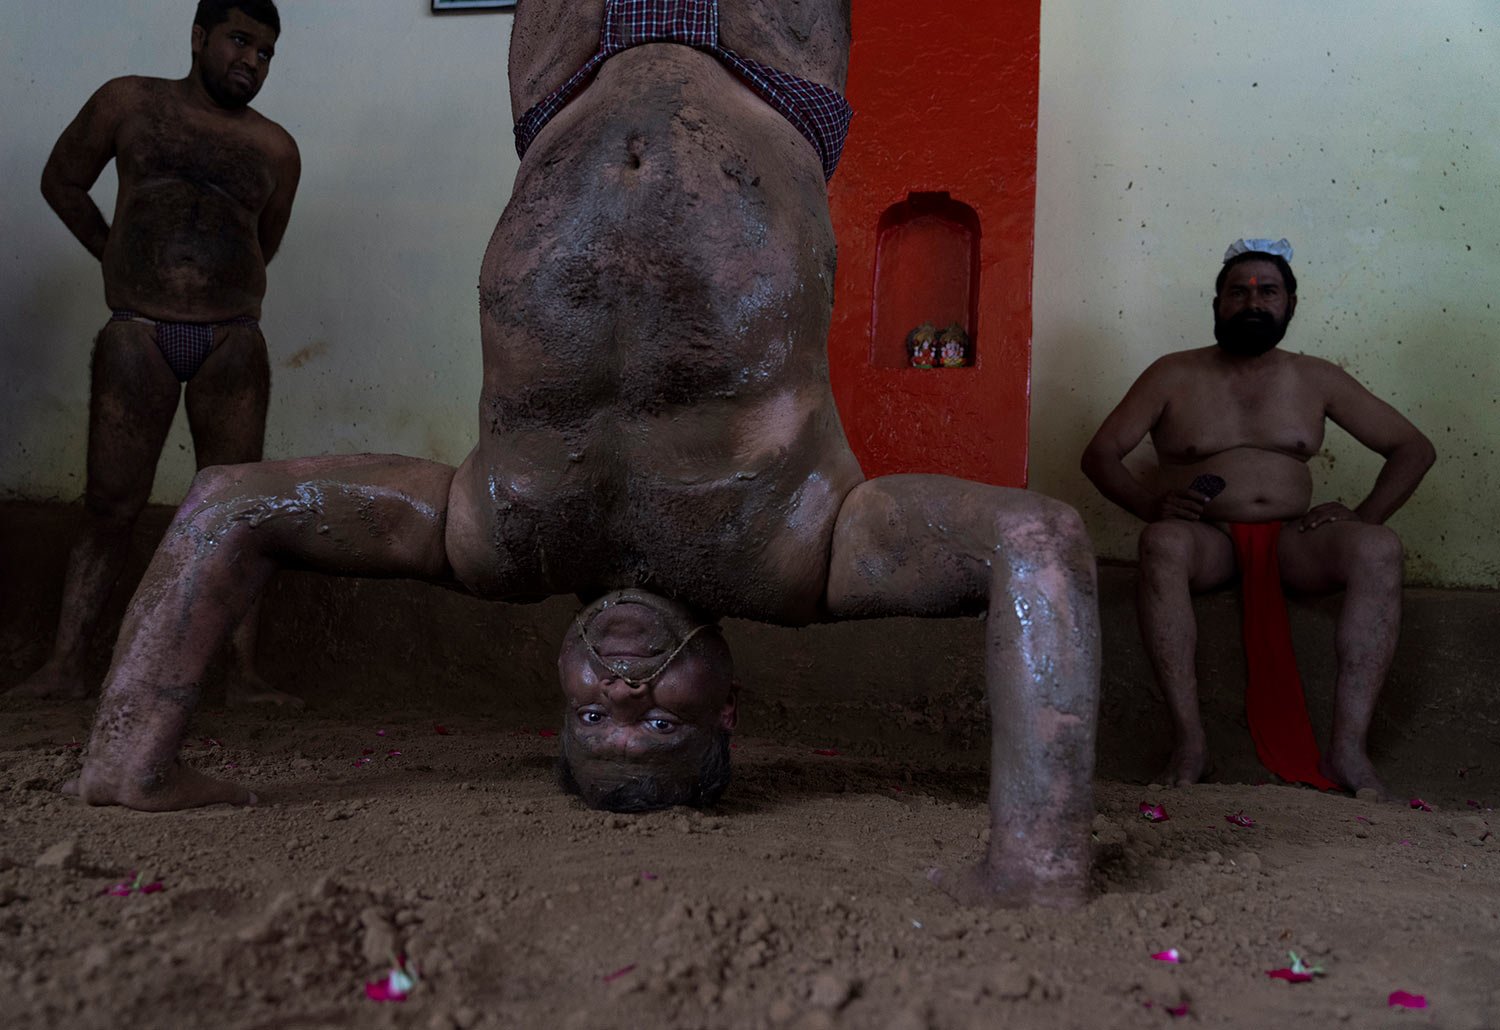  Traditional Indian wrestlers prepare for a bout during Nag Panchami festival in Prayagraj, India. Tuesday, Aug. 2, 2022.  (AP Photo/Rajesh Kumar Singh) 